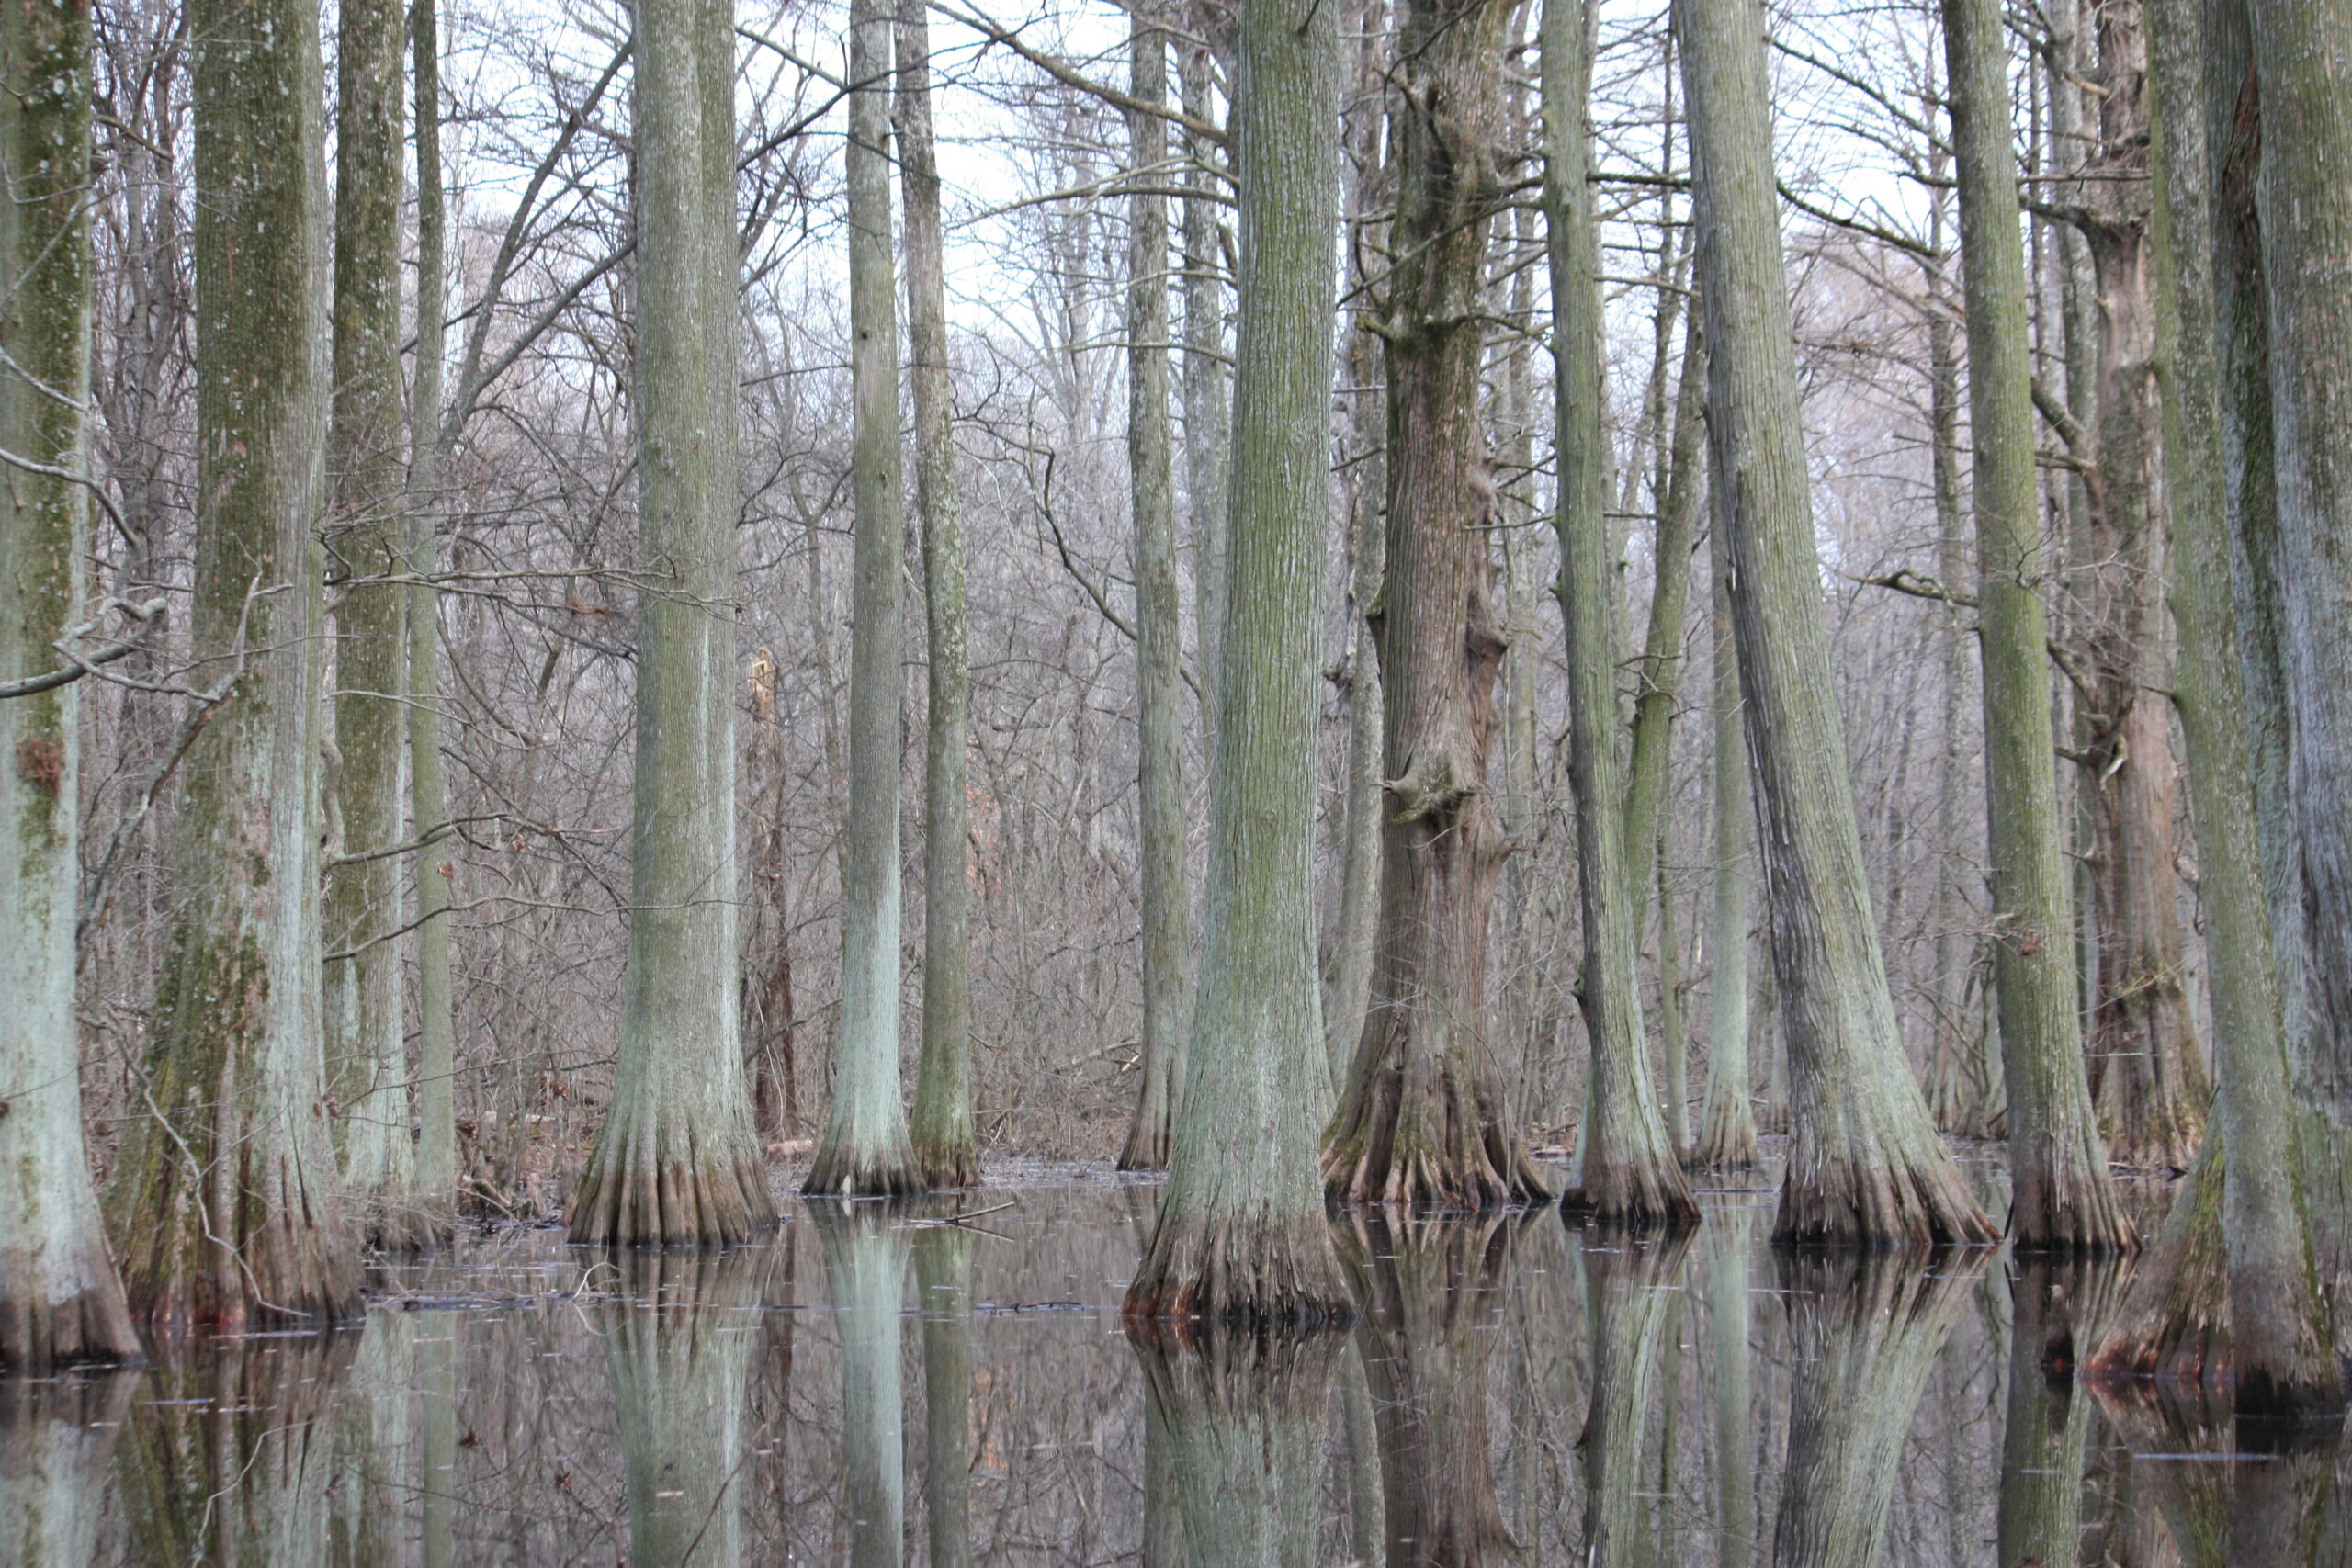 Cyprus trees on Reelfoot Lake in Tennessee, where two men were killed in January 2021.